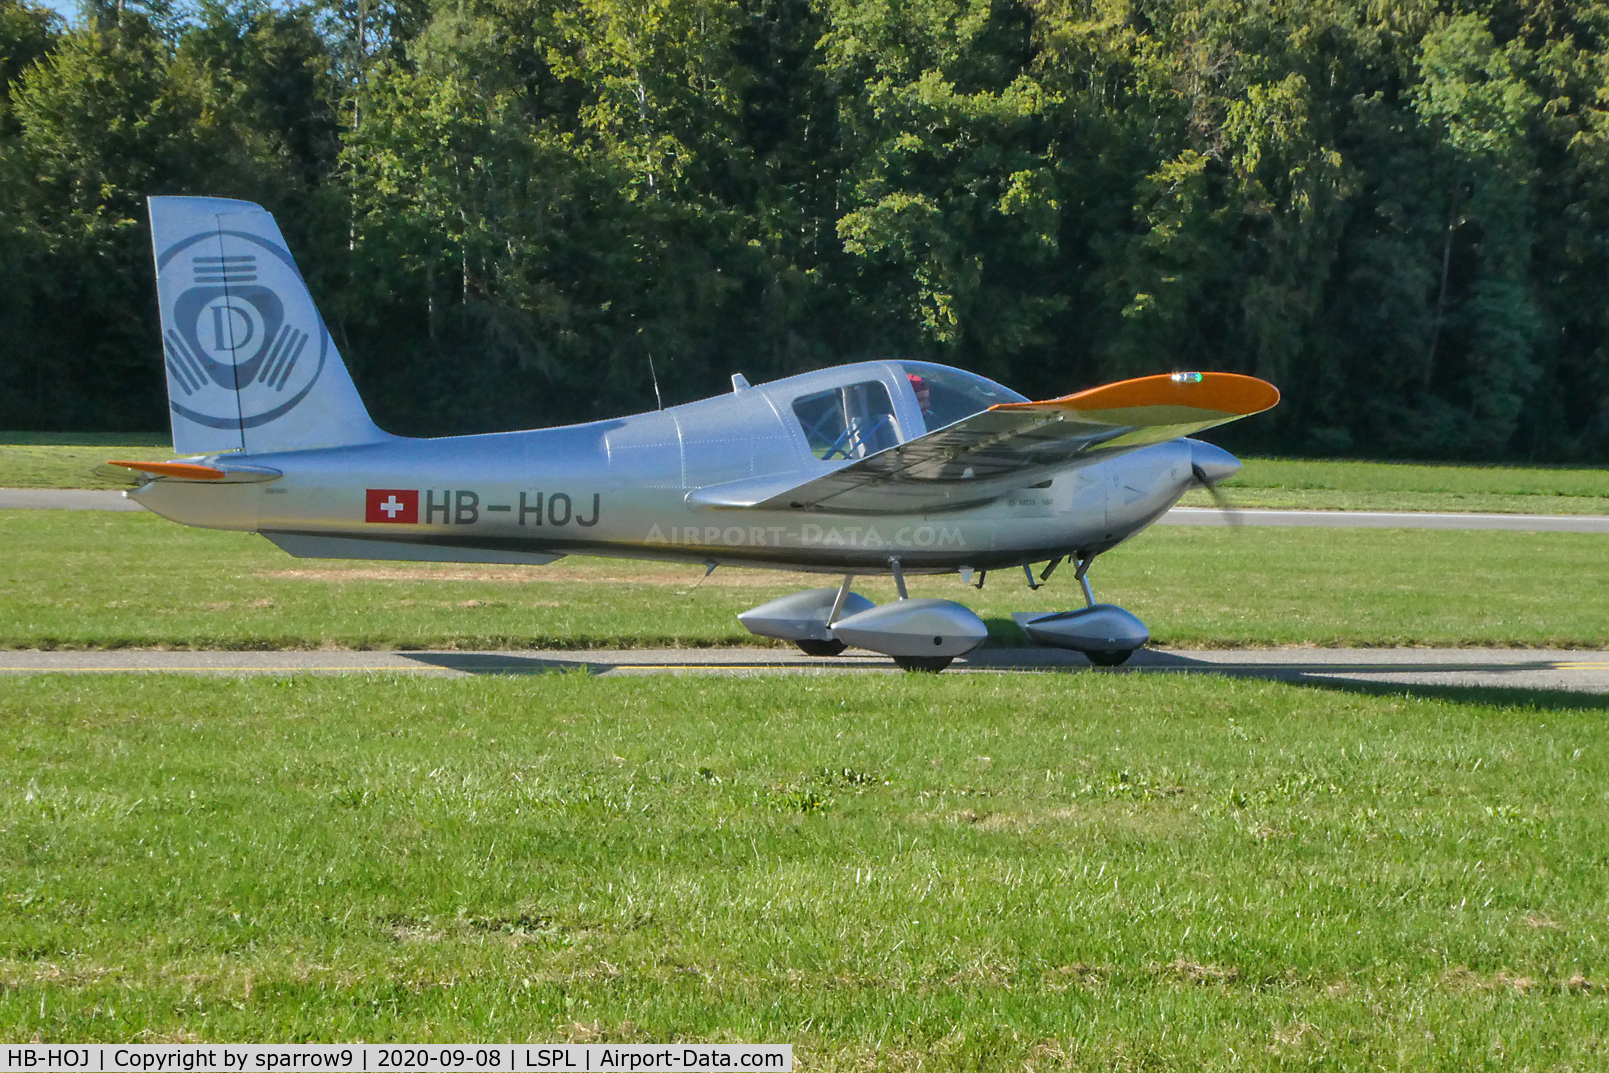 HB-HOJ, 1990 MDC Max Daetwyler MD3-160 Swiss Trainer C/N 002, At its birthplace: Langenthal-Bleienbach.